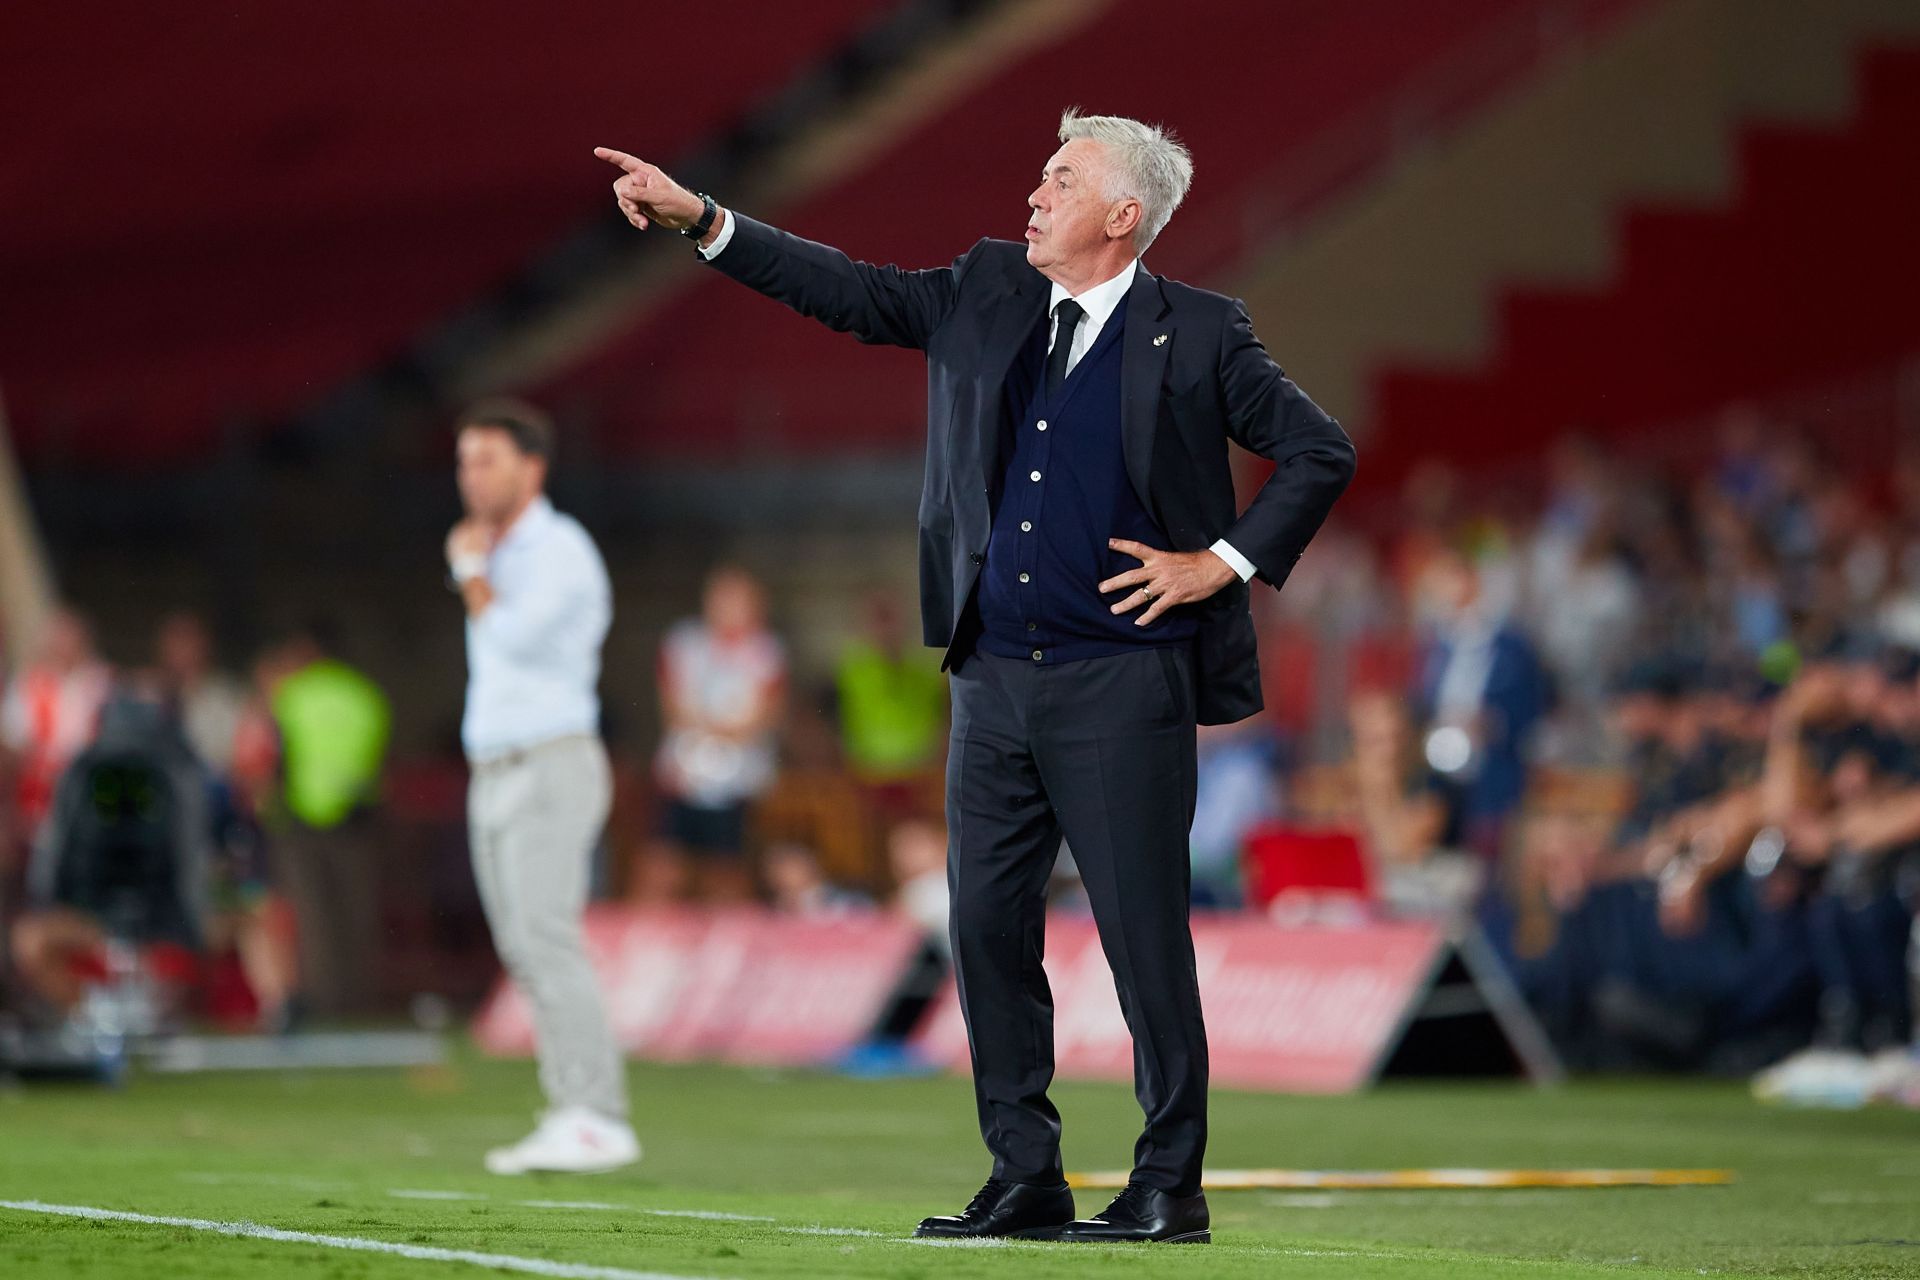 Carlo Ancelotti tries to cheer his team on against UD Almeria.